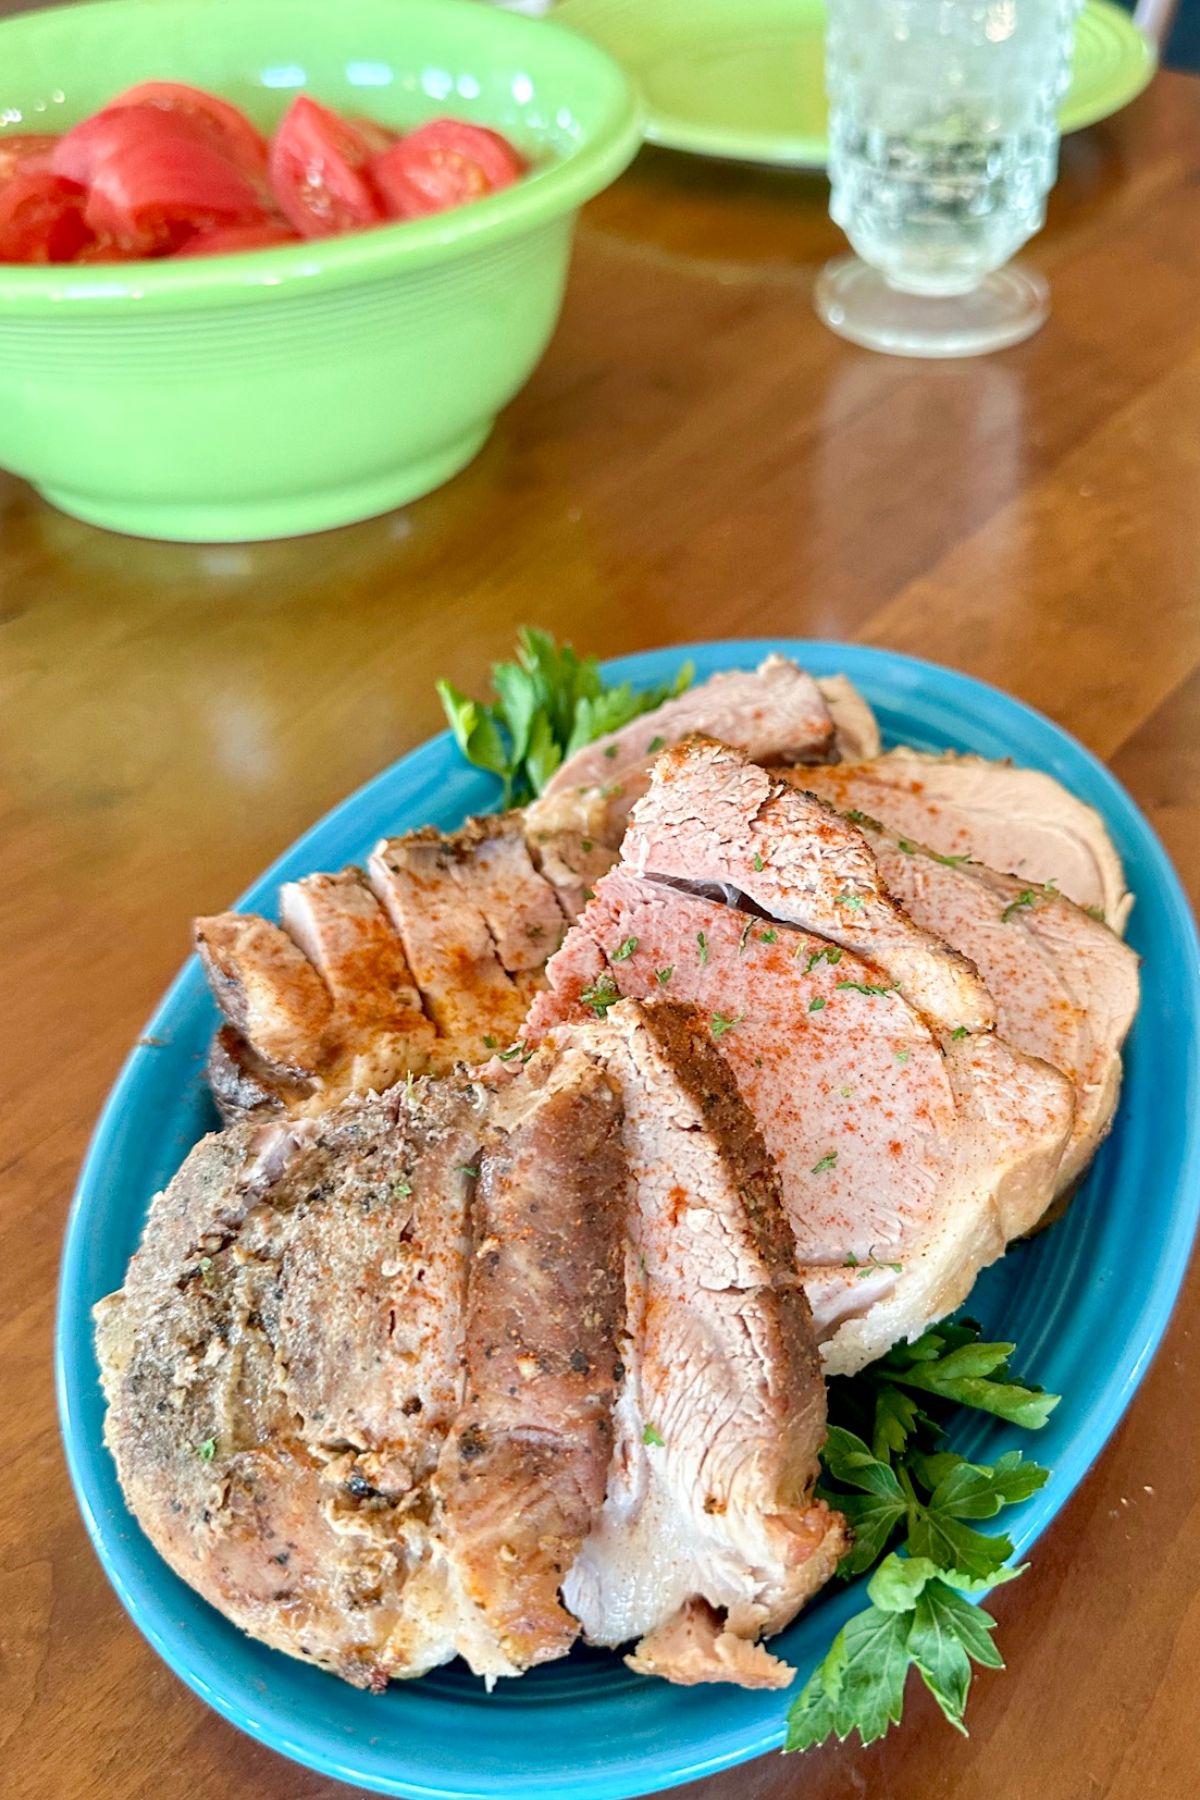 Plate of Sous Vide Pork Roast with parsley.